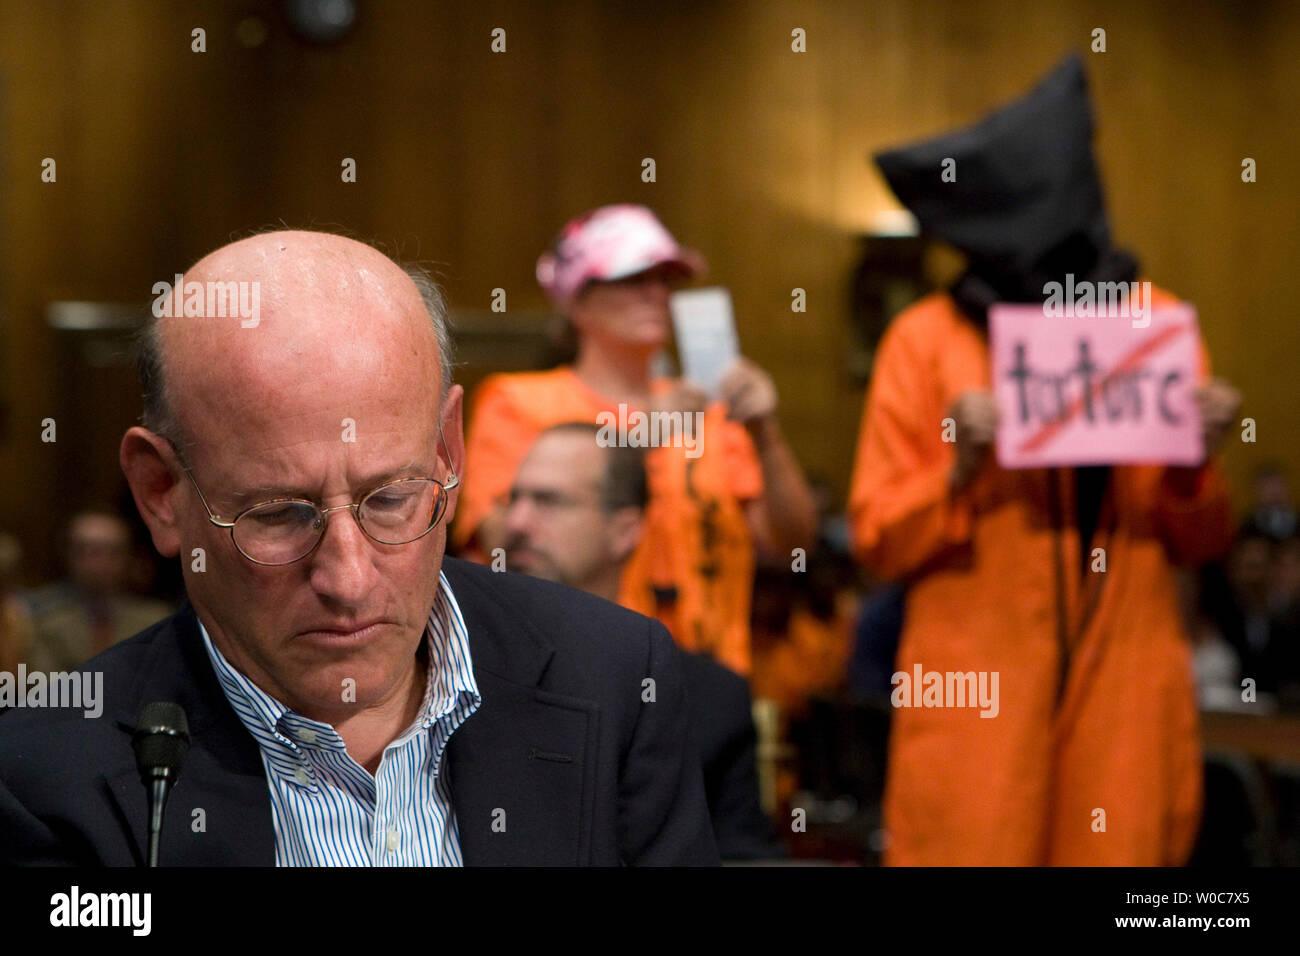 Richard Shiffrin, former deputy general counsel for intelligence at the Defense Department, prepares to testify during a Senate Armed Services Committee hearing on the origins of aggressive interrogation techniques and treatment of detainees in U.S. Custody on Capitol Hill in Washington on June 17, 2008. (UPI Photo/Patrick D. McDermott) Stock Photo